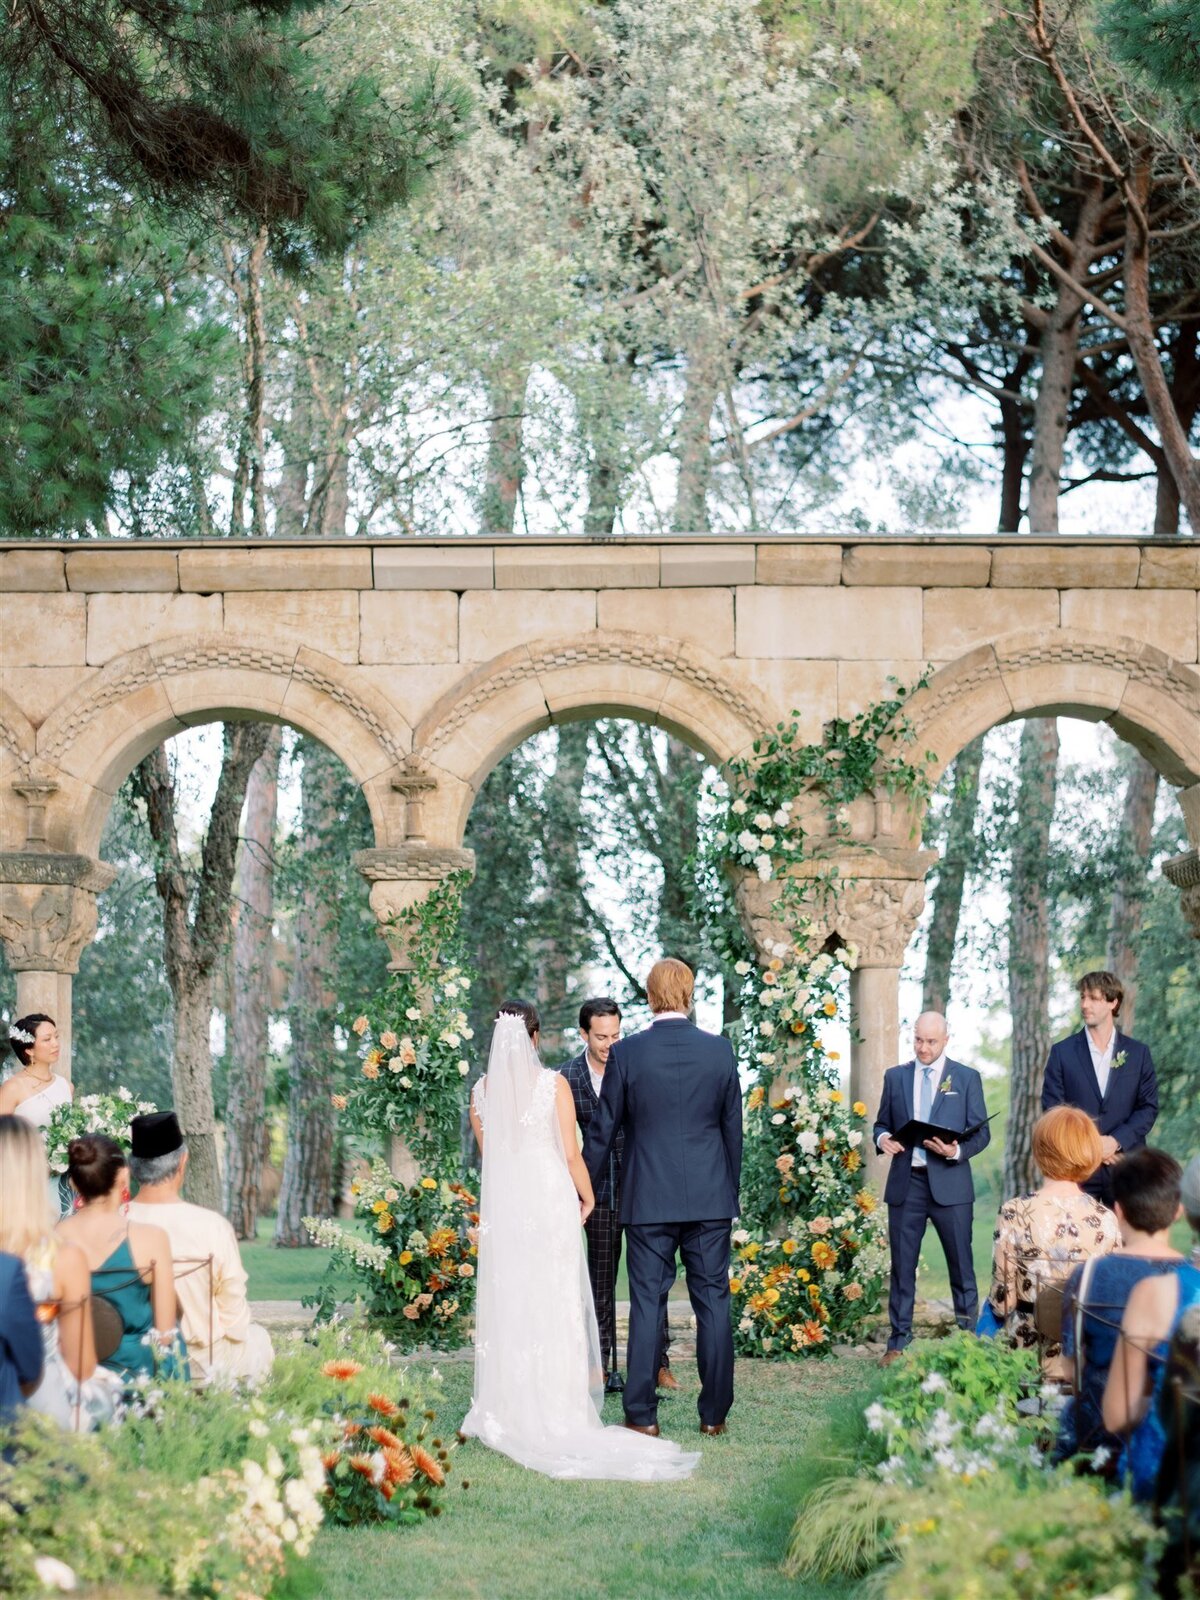 Outside wedding ceremony, nature-inspired  arch